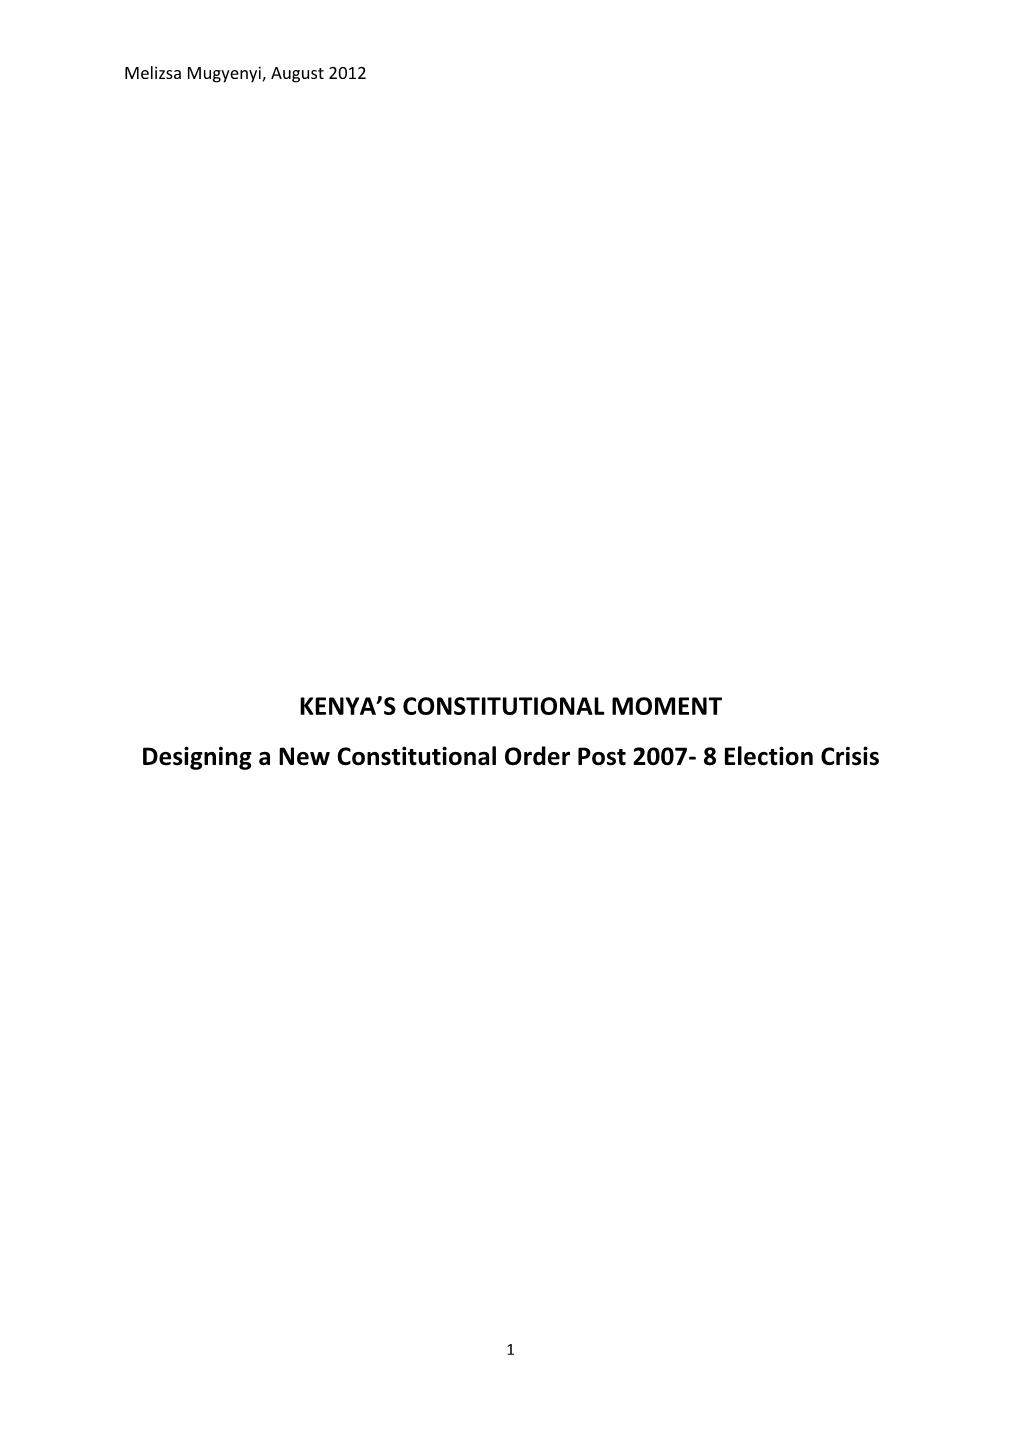 Kenya's Constitutional Moment: Designing a New Constitutional Order Post 2007-8 Election Crisis